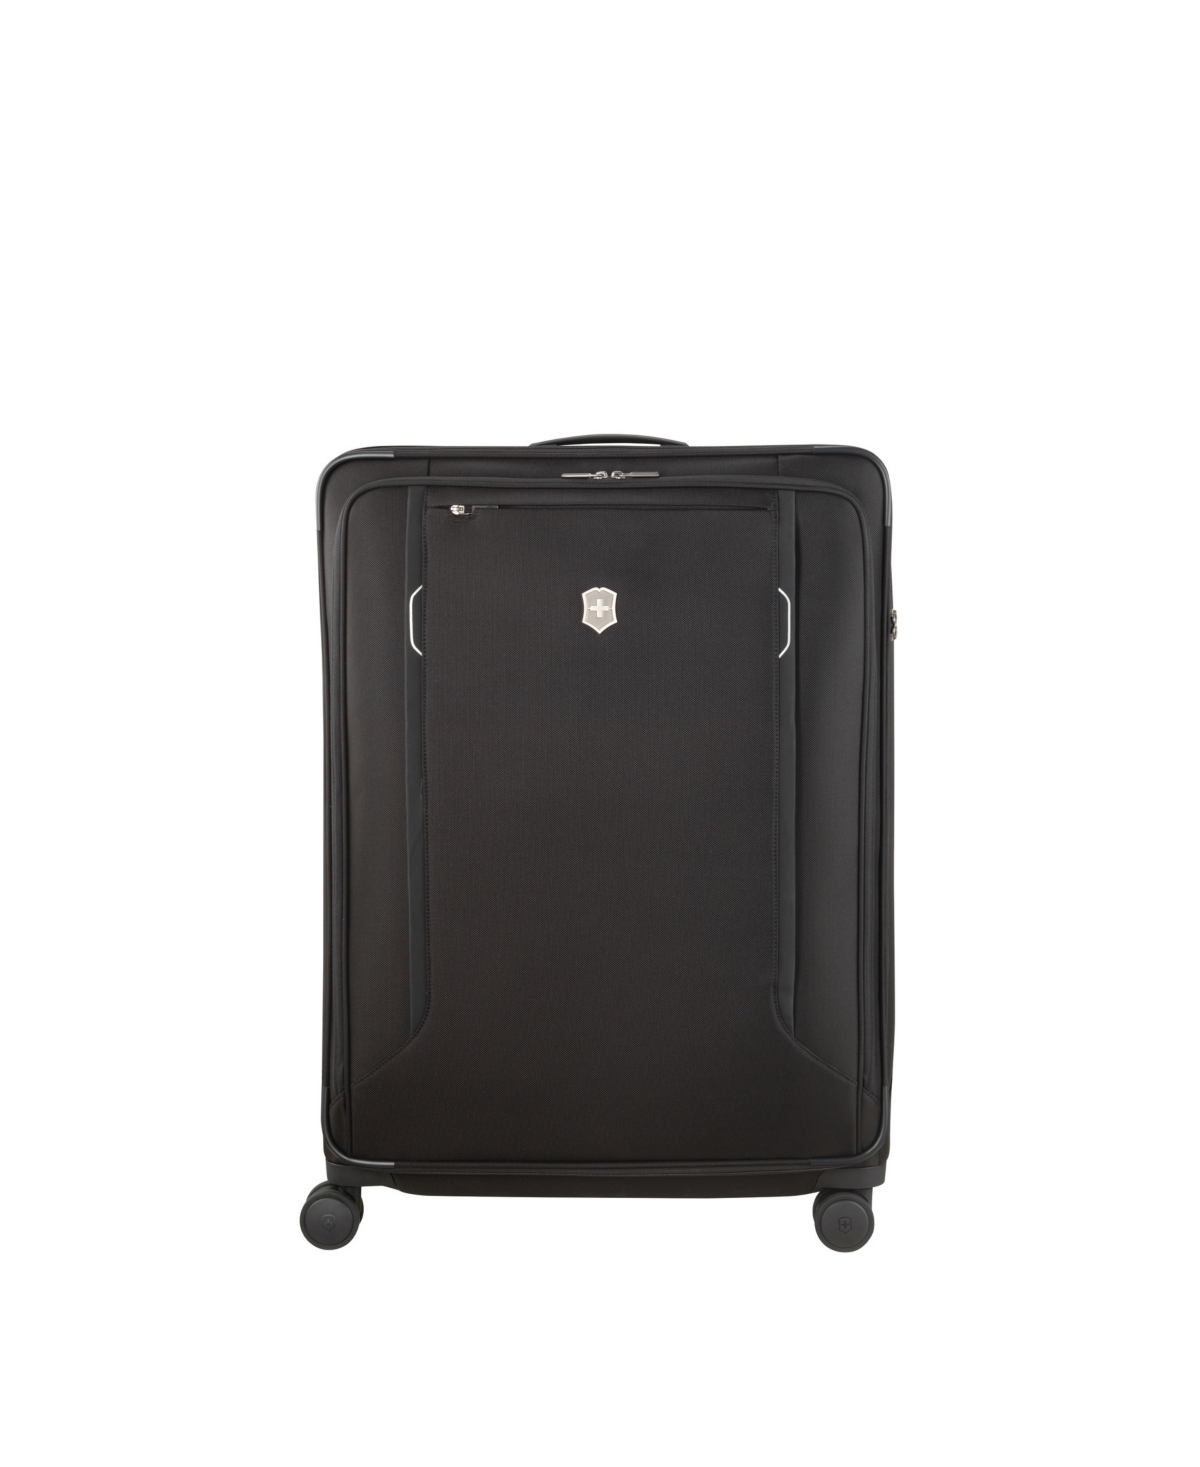 Werks 6.0 Extra Large 30" Check-in Softside Suitcase - Black